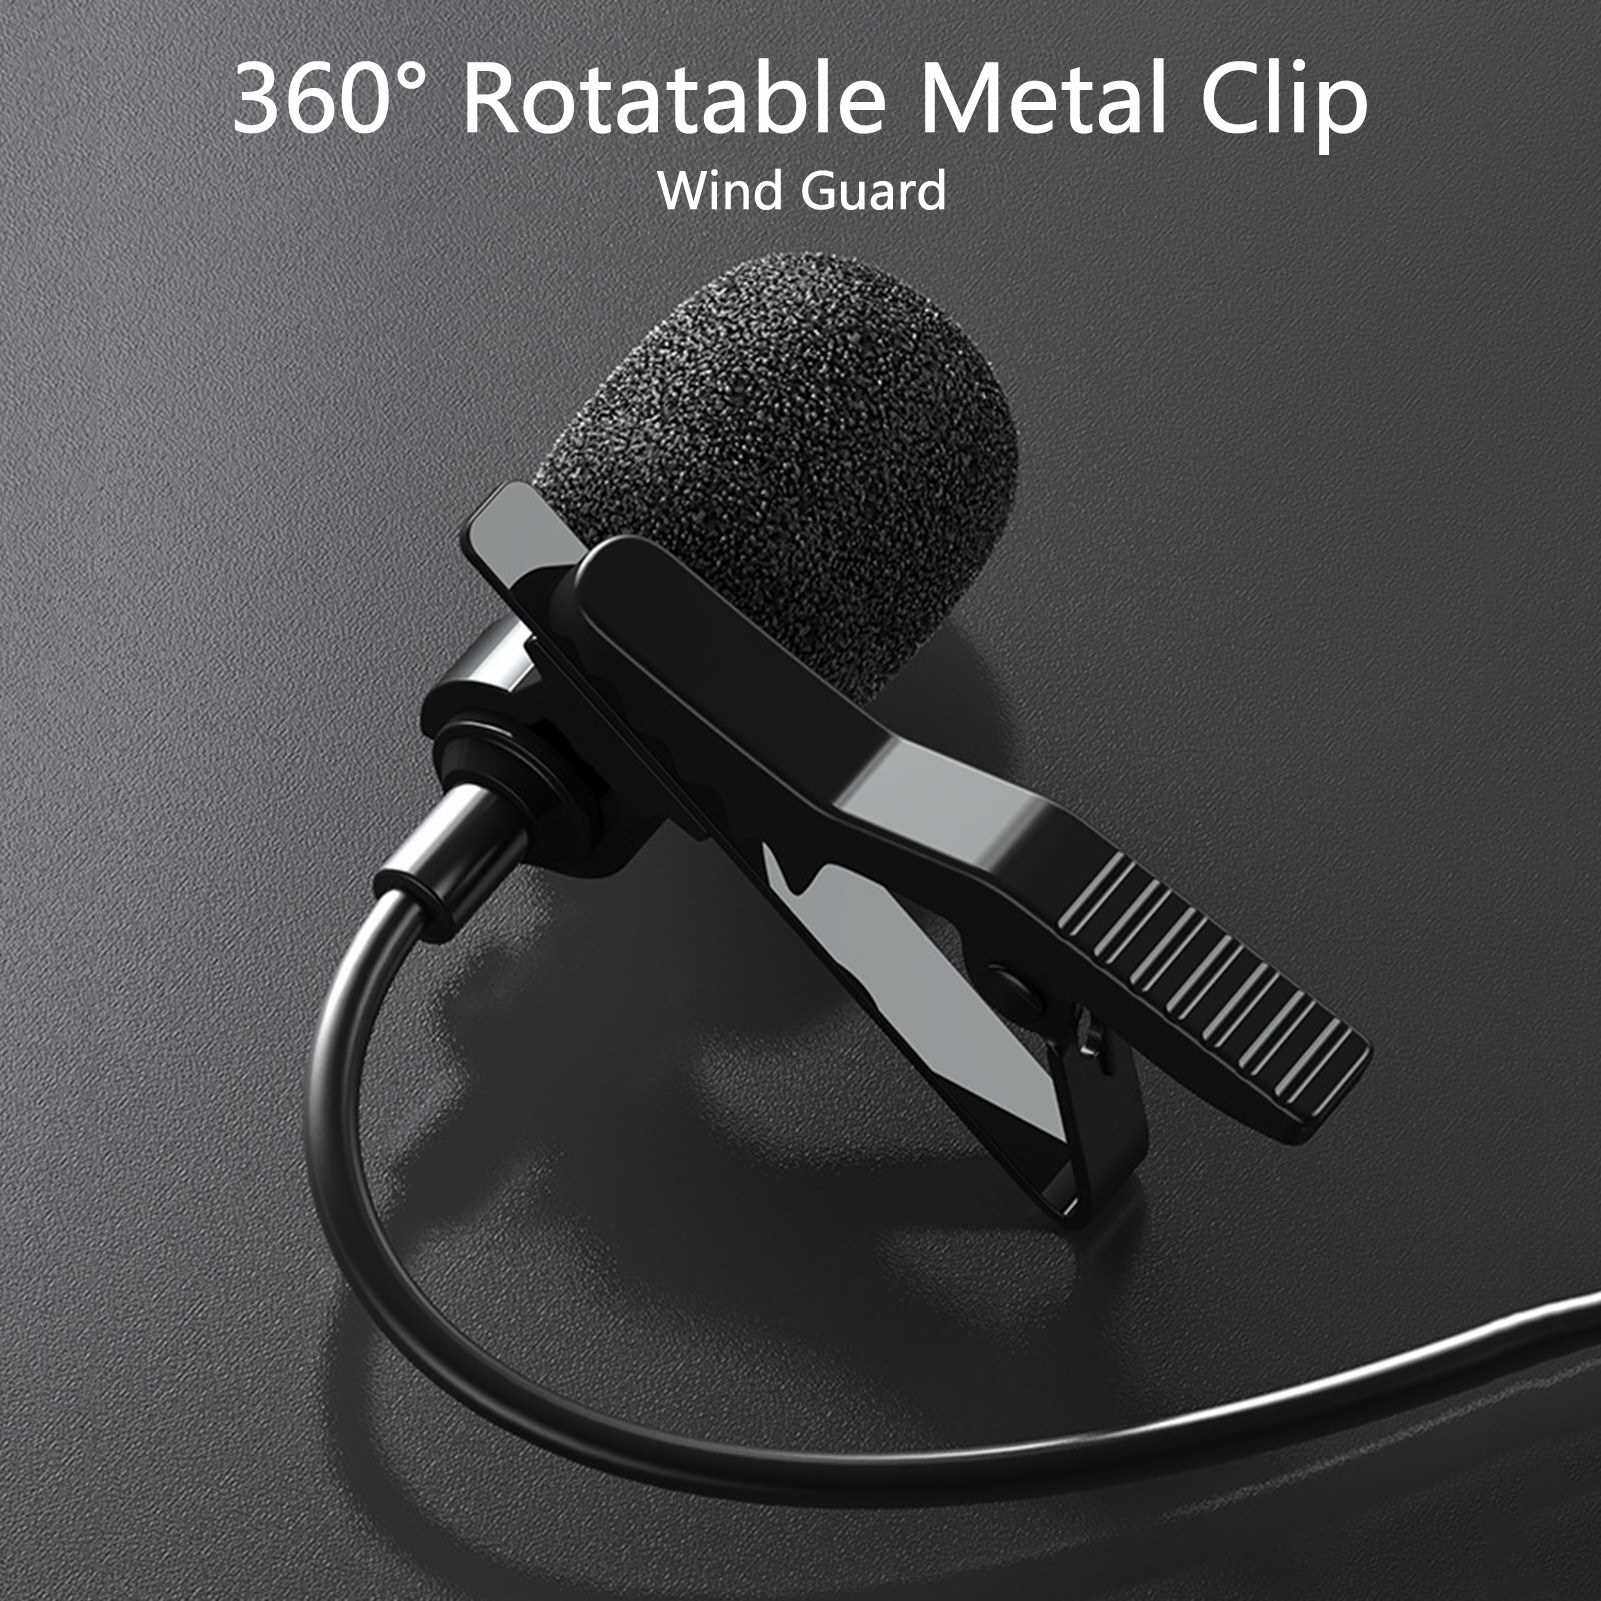 Lavalier Microphone Professional Camera Microphone Mobile Microphone for SLR Interview Conference Recording Video Blog Omnidirectional Lapel Microphone with 2m Audio Extension Cable and 3.5mm Adaptor (Standard)